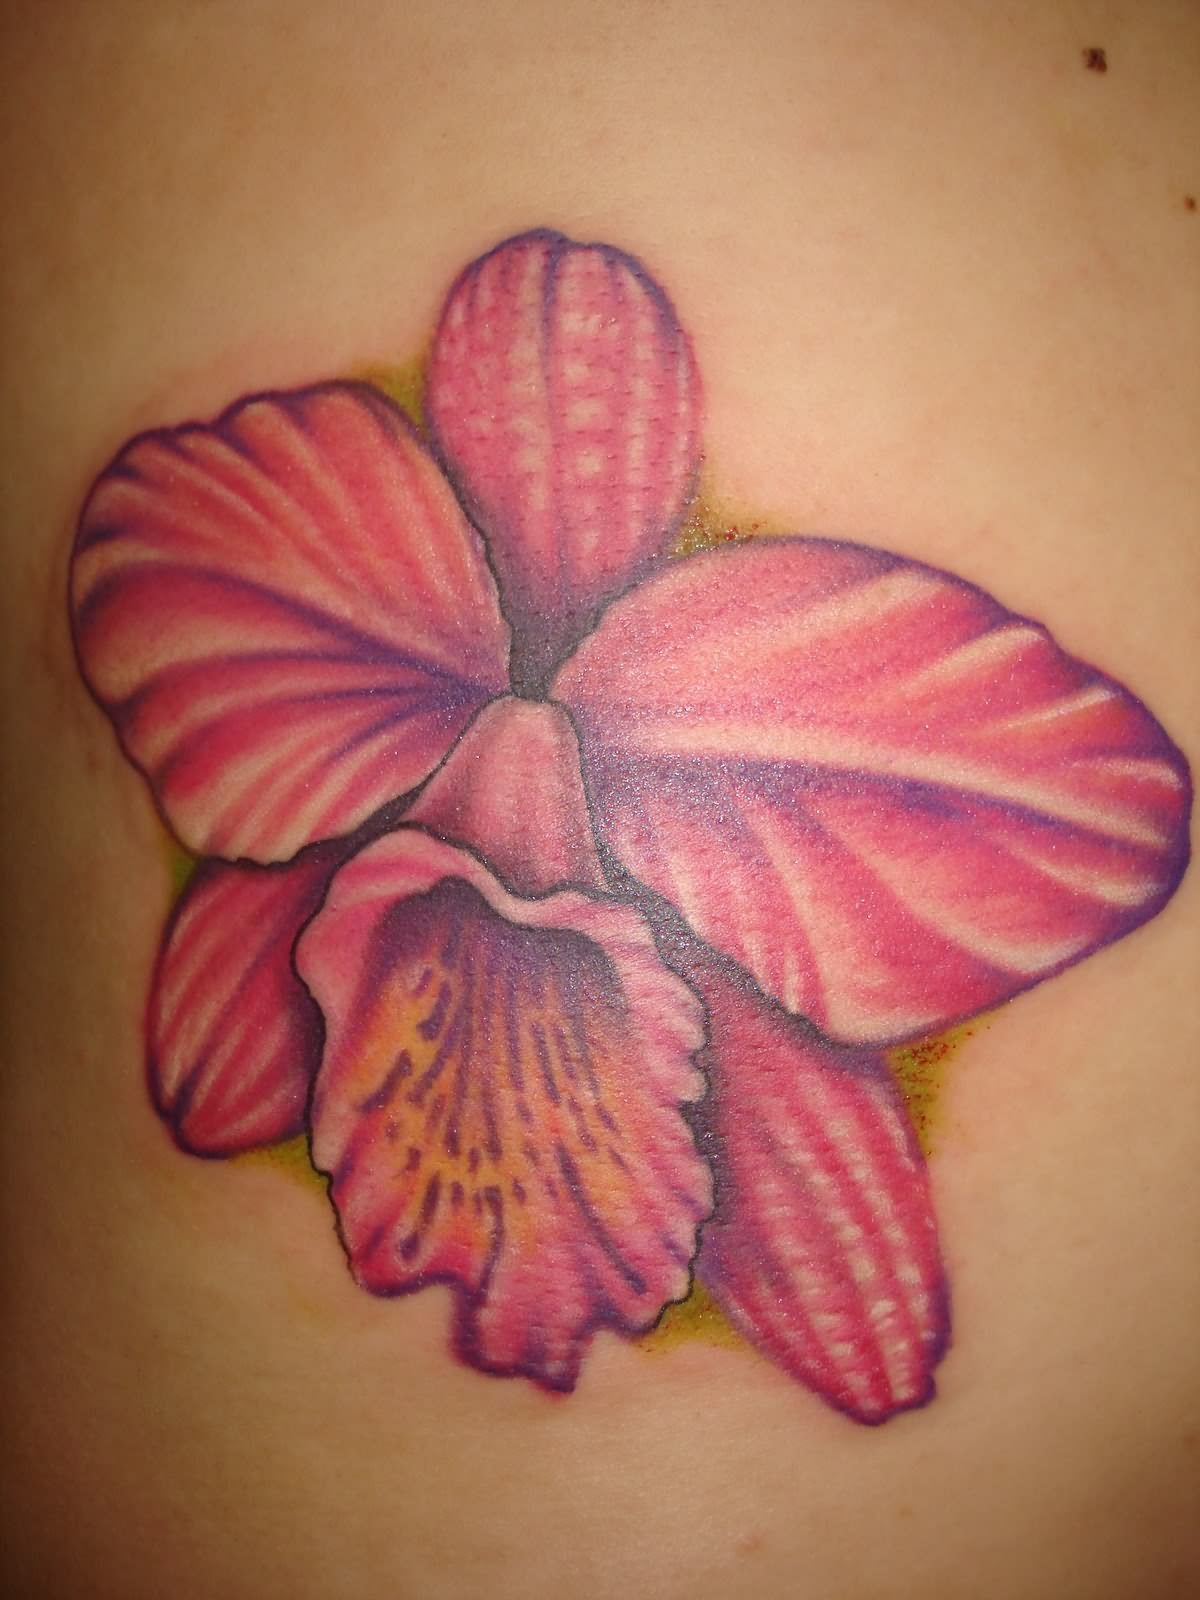 Colourful Tattoo - Orchid Flower